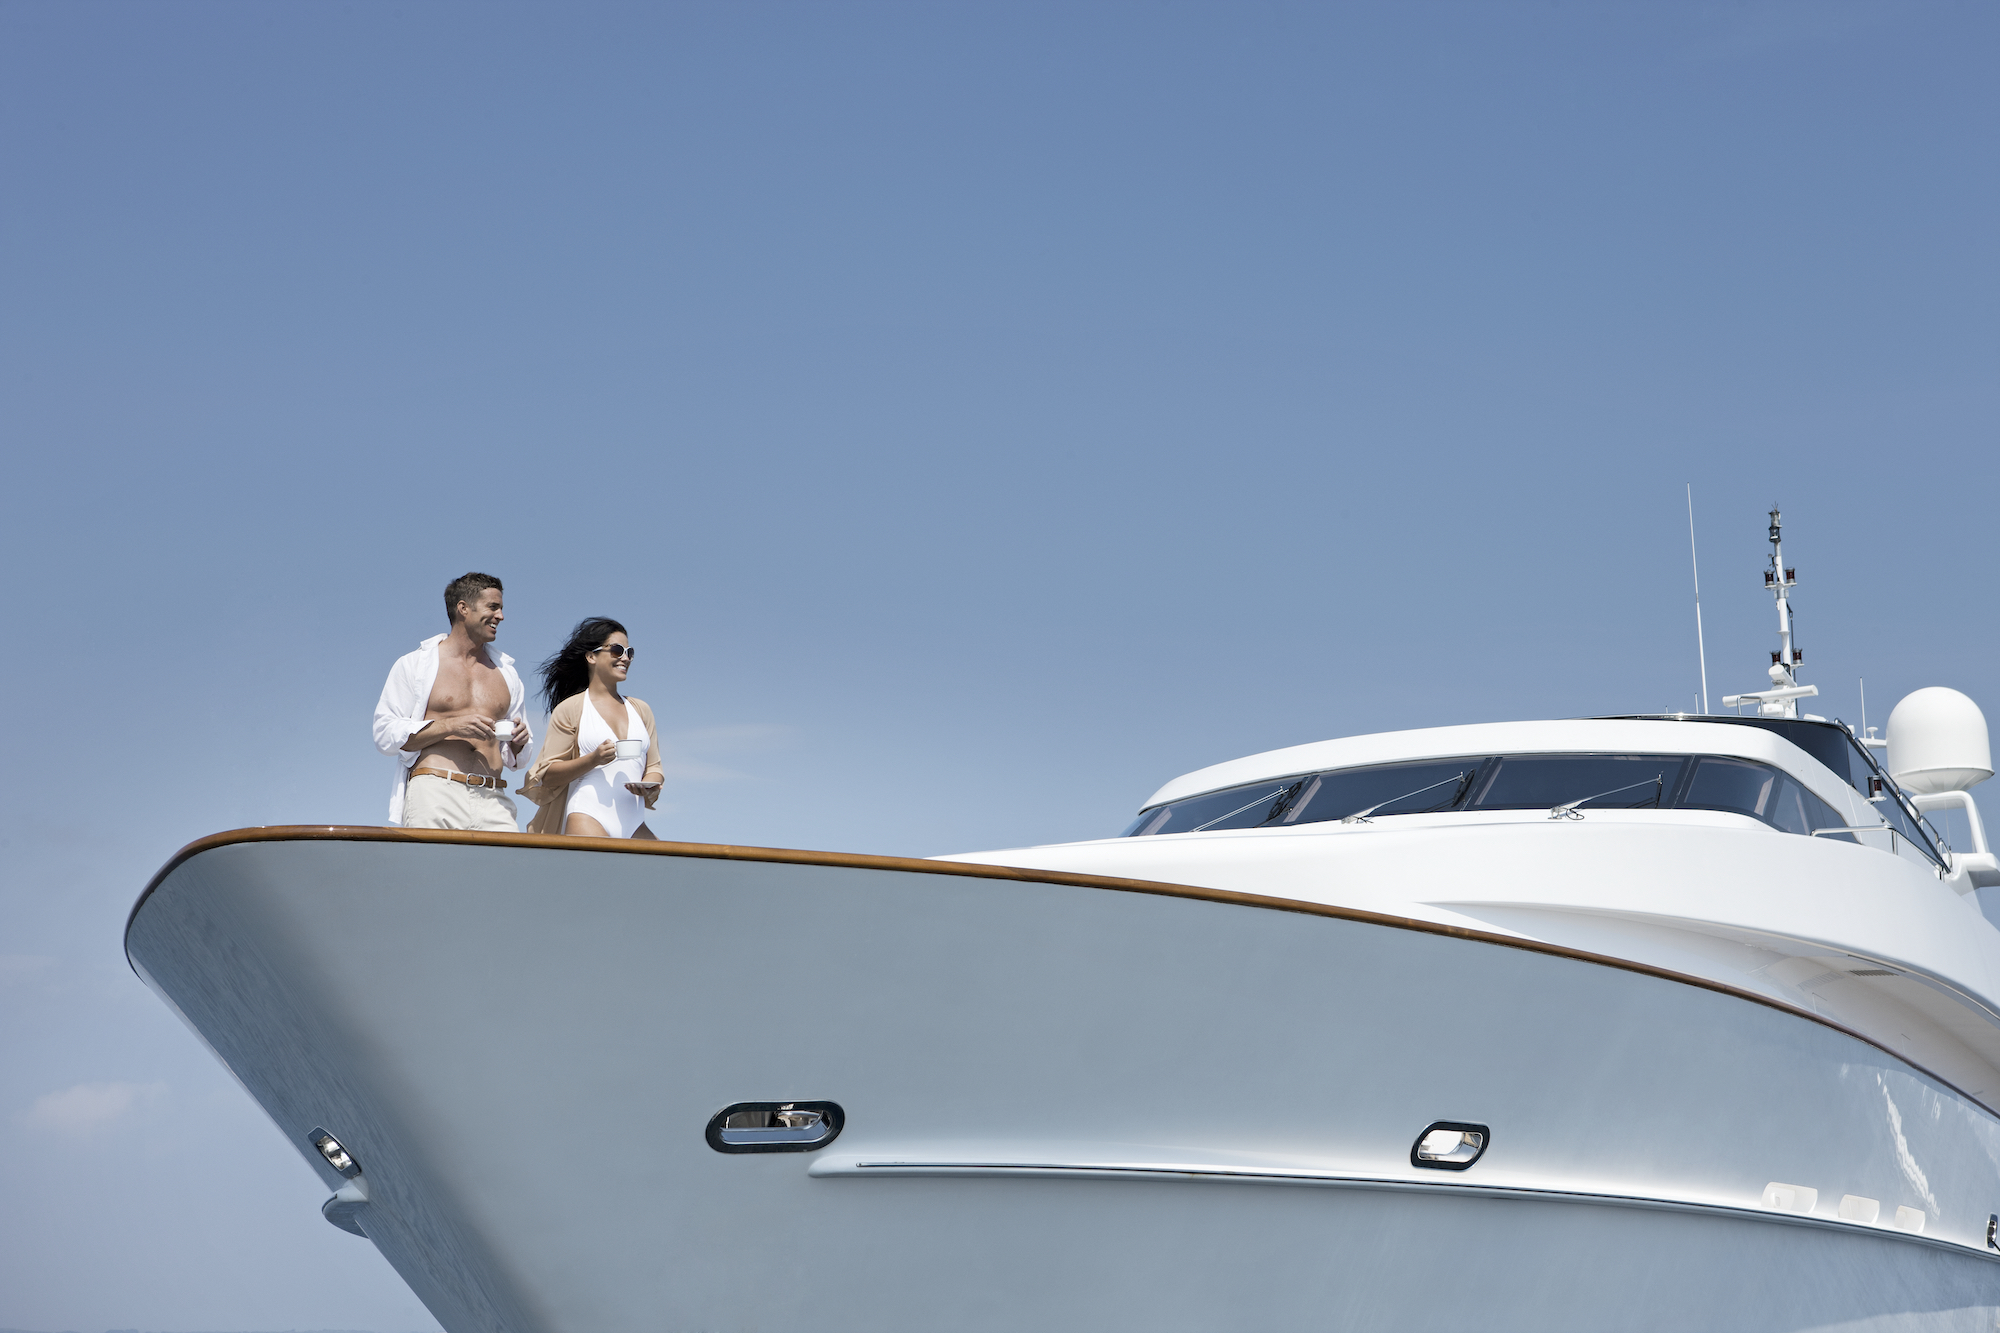 Superyacht purchase and the importance of professional advice